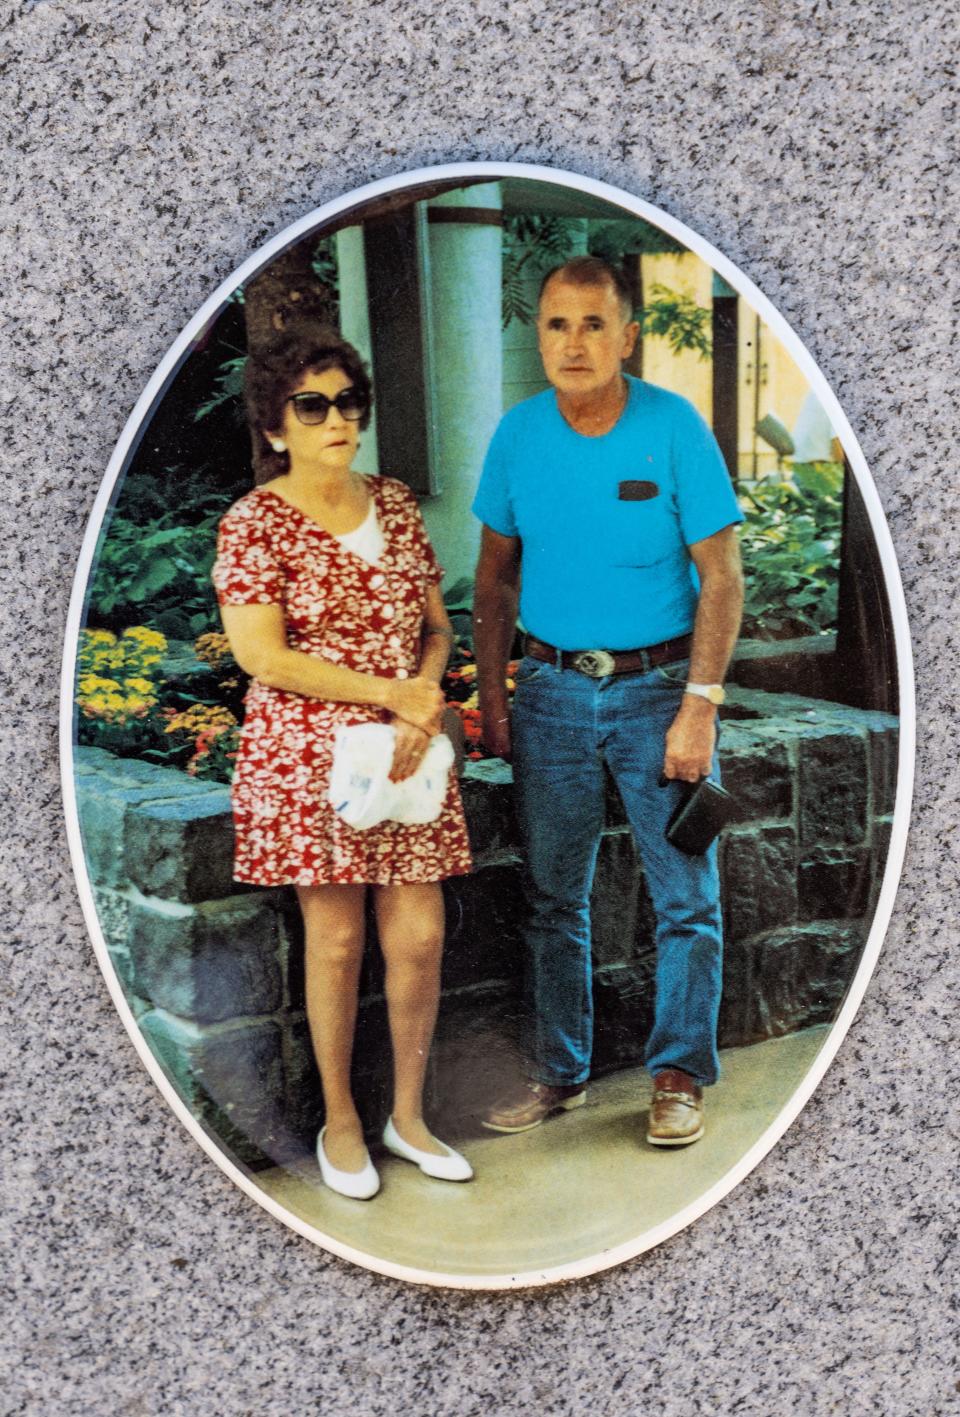 A photo of Anna Studey with her husband Donald Studey on her grave stone near Thurman Iowa, Wednesday, Oct. 26, 2022. According to his daughter, Donald Dean Studey murdered "five or six" women a year and buried them in and around an abandoned well on his property. 